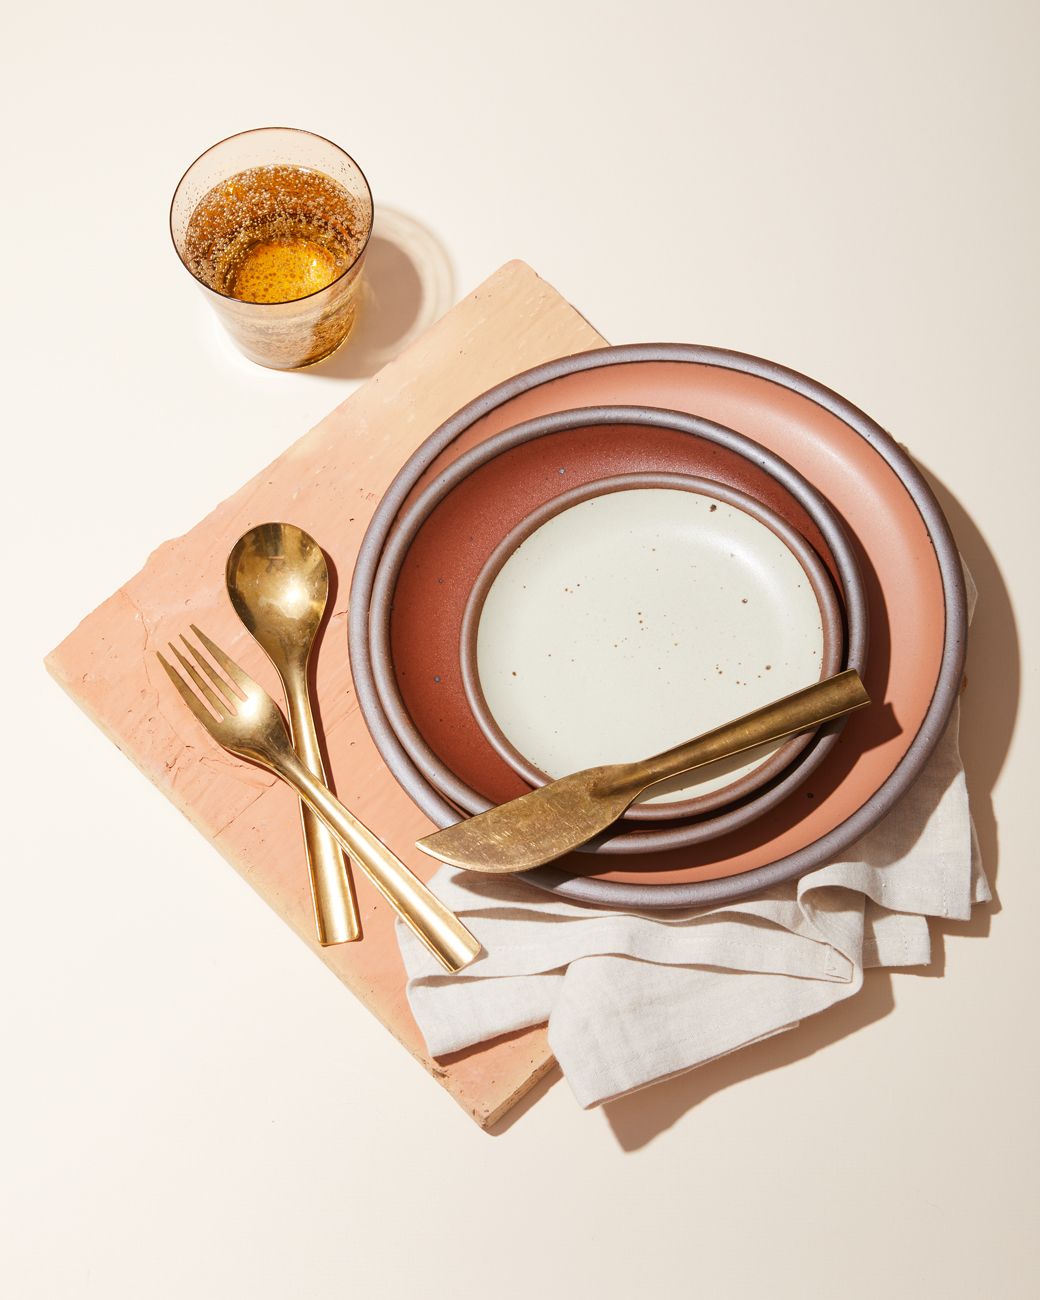 A table setting with three plates in a soft nude (Utah), a burnt red (Amaro), and an off-white (Panna Cotta). The setting also shows brass flatware, a natural-white napkin, and an orange water glass.